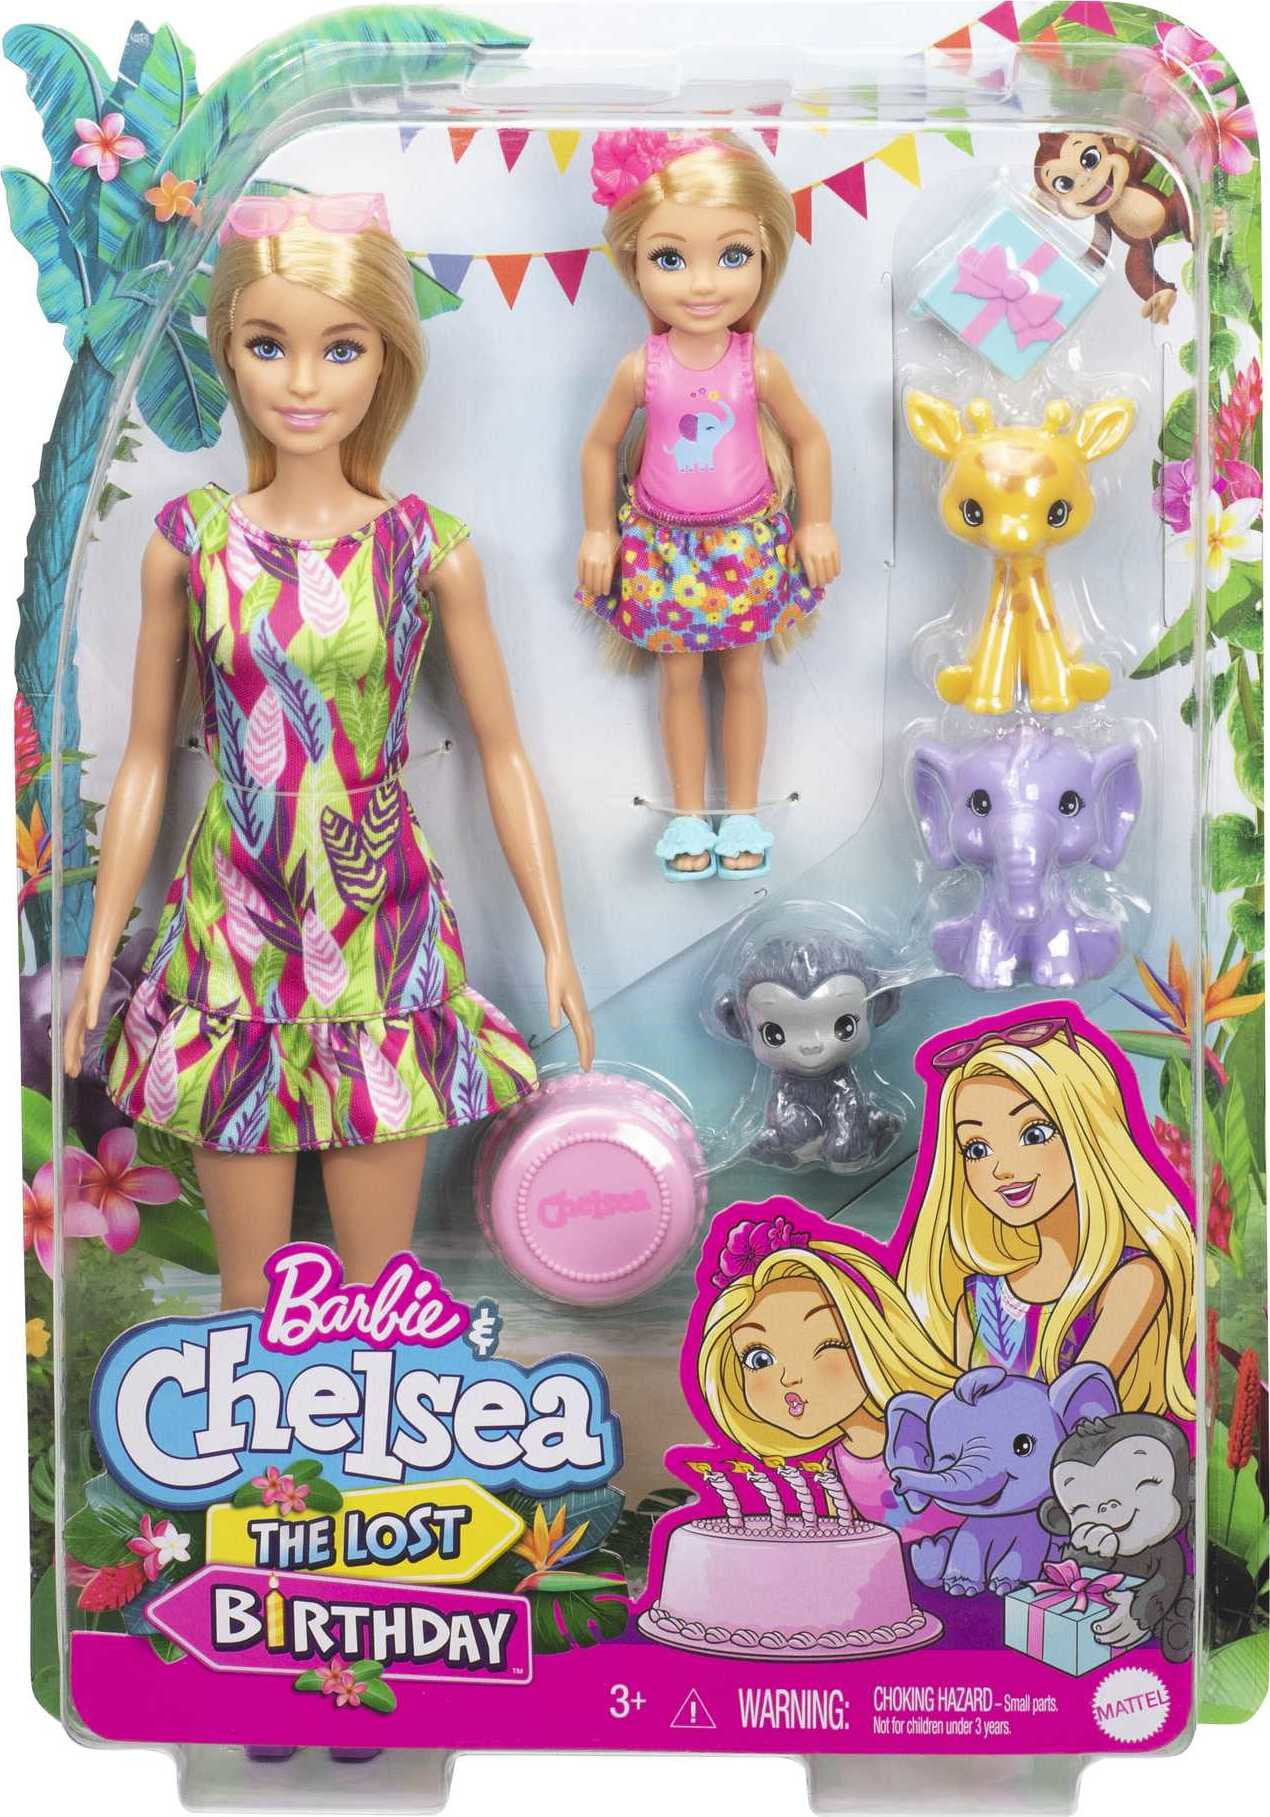 Barbie and Chelsea The Lost Birthday Dolls, Pets & Accessories For 3 To 7 Year Olds - Walmart.com